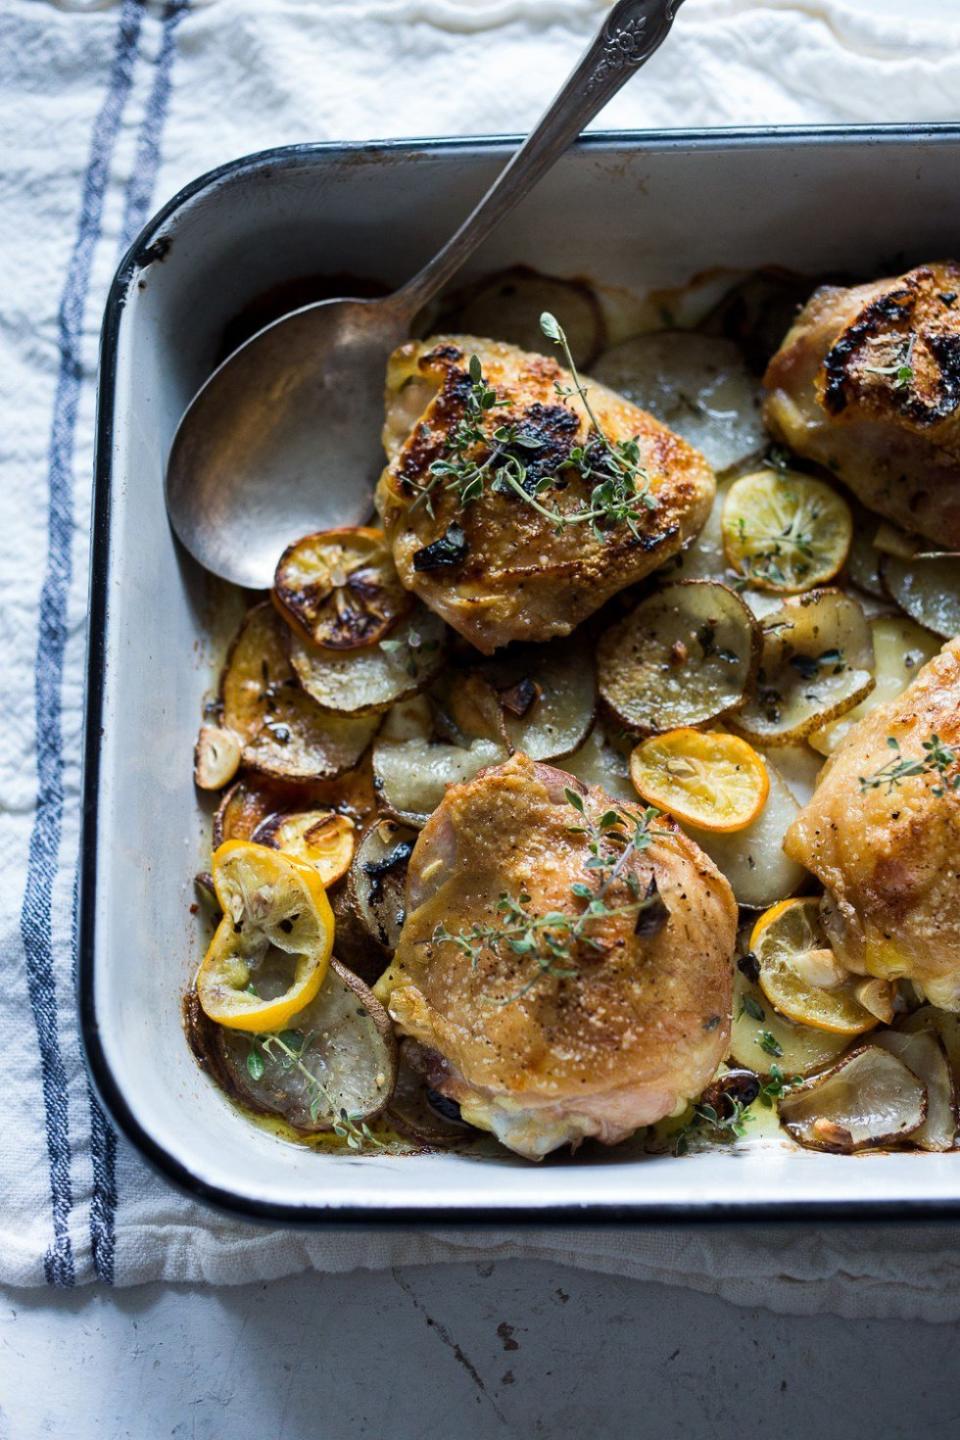 <strong>Get the <a href="https://www.feastingathome.com/one-pan-chicken-and-crispy-potatoes/" target="_blank">Sheet-Pan Chicken And Crispy Potatoes With Lemon And Thyme</a> recipe from Feasting At Home</strong>